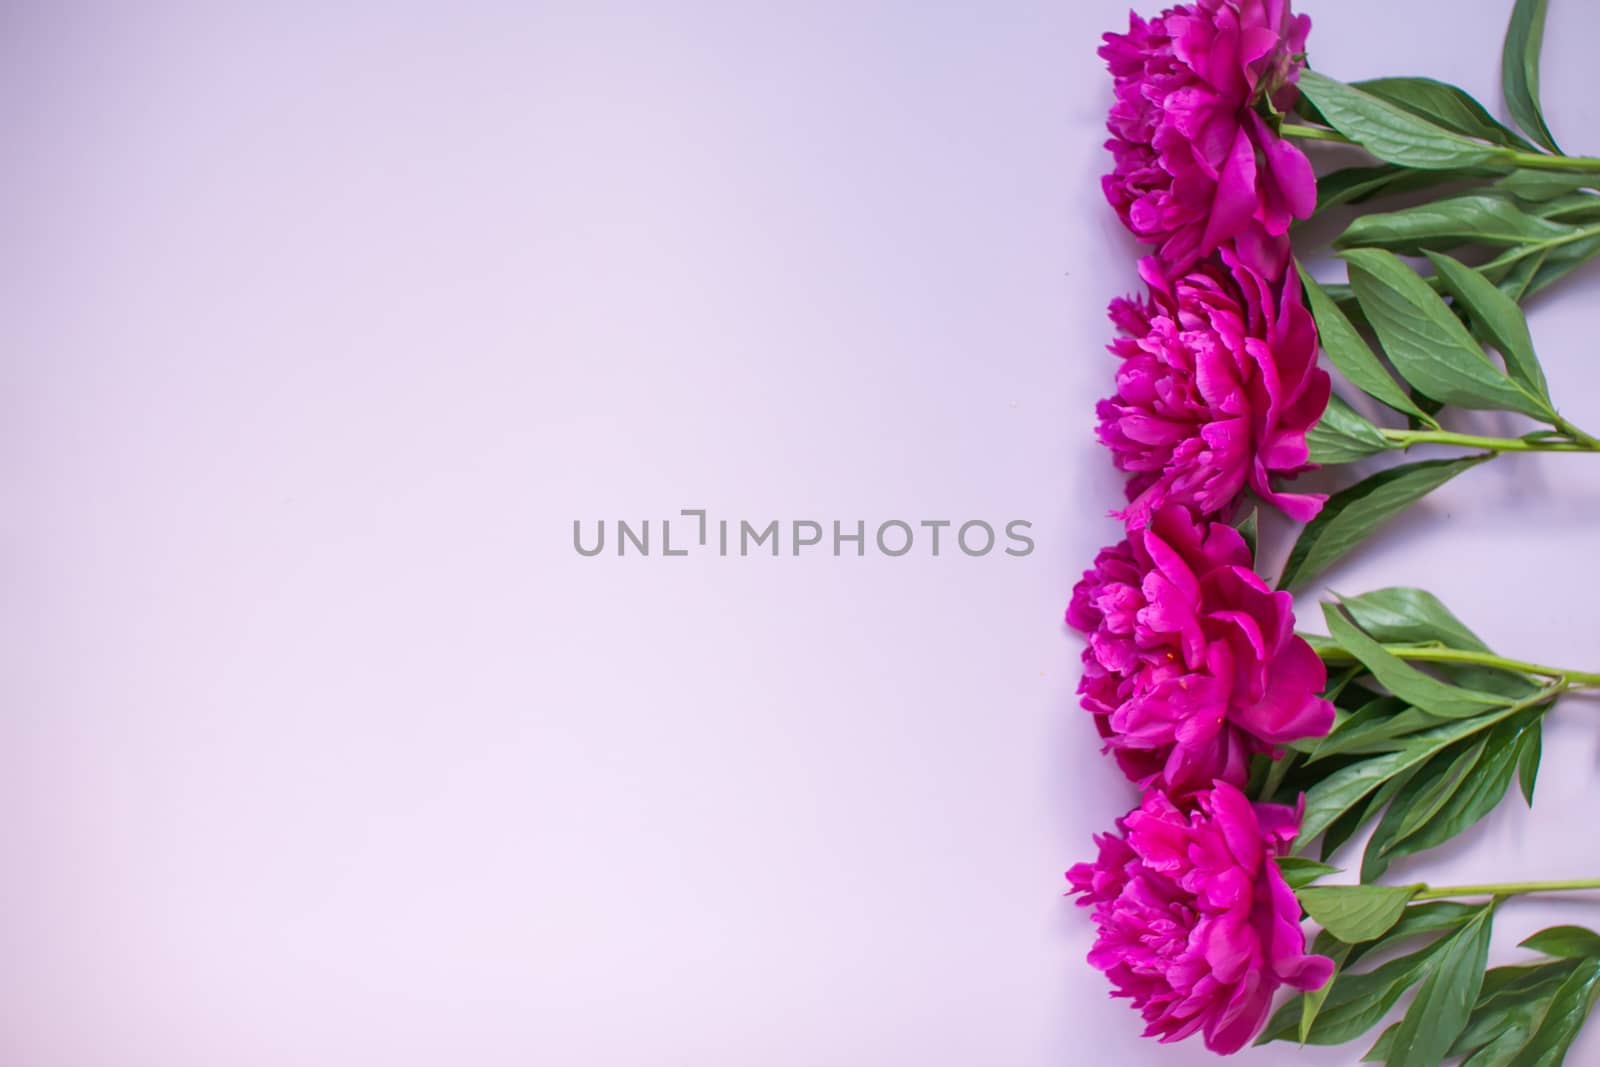 Layout on a lilac background with dark and light pink peonies